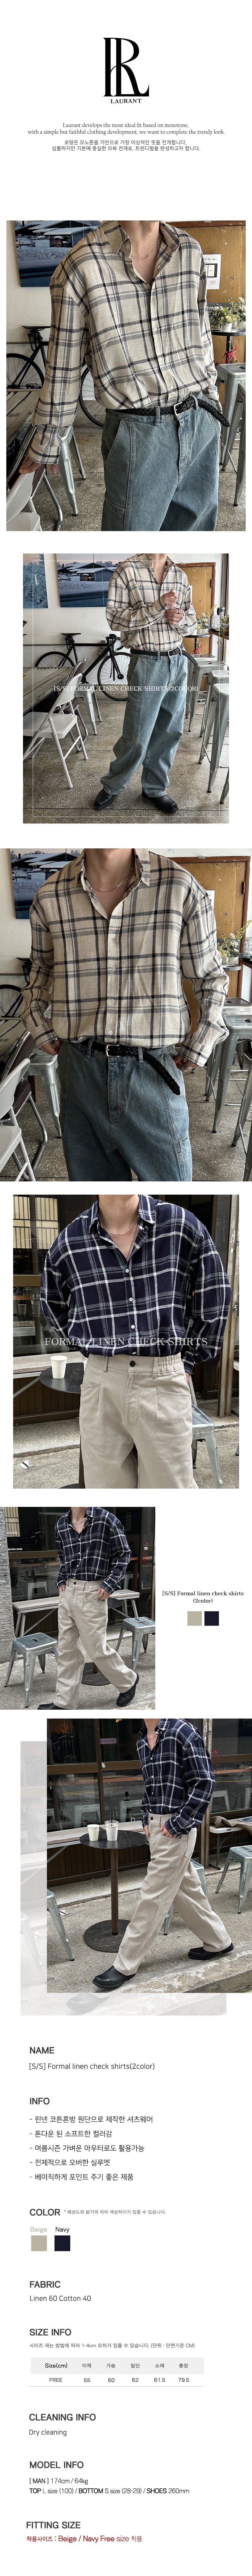 [S/S] Formal linen check shirts(2color)